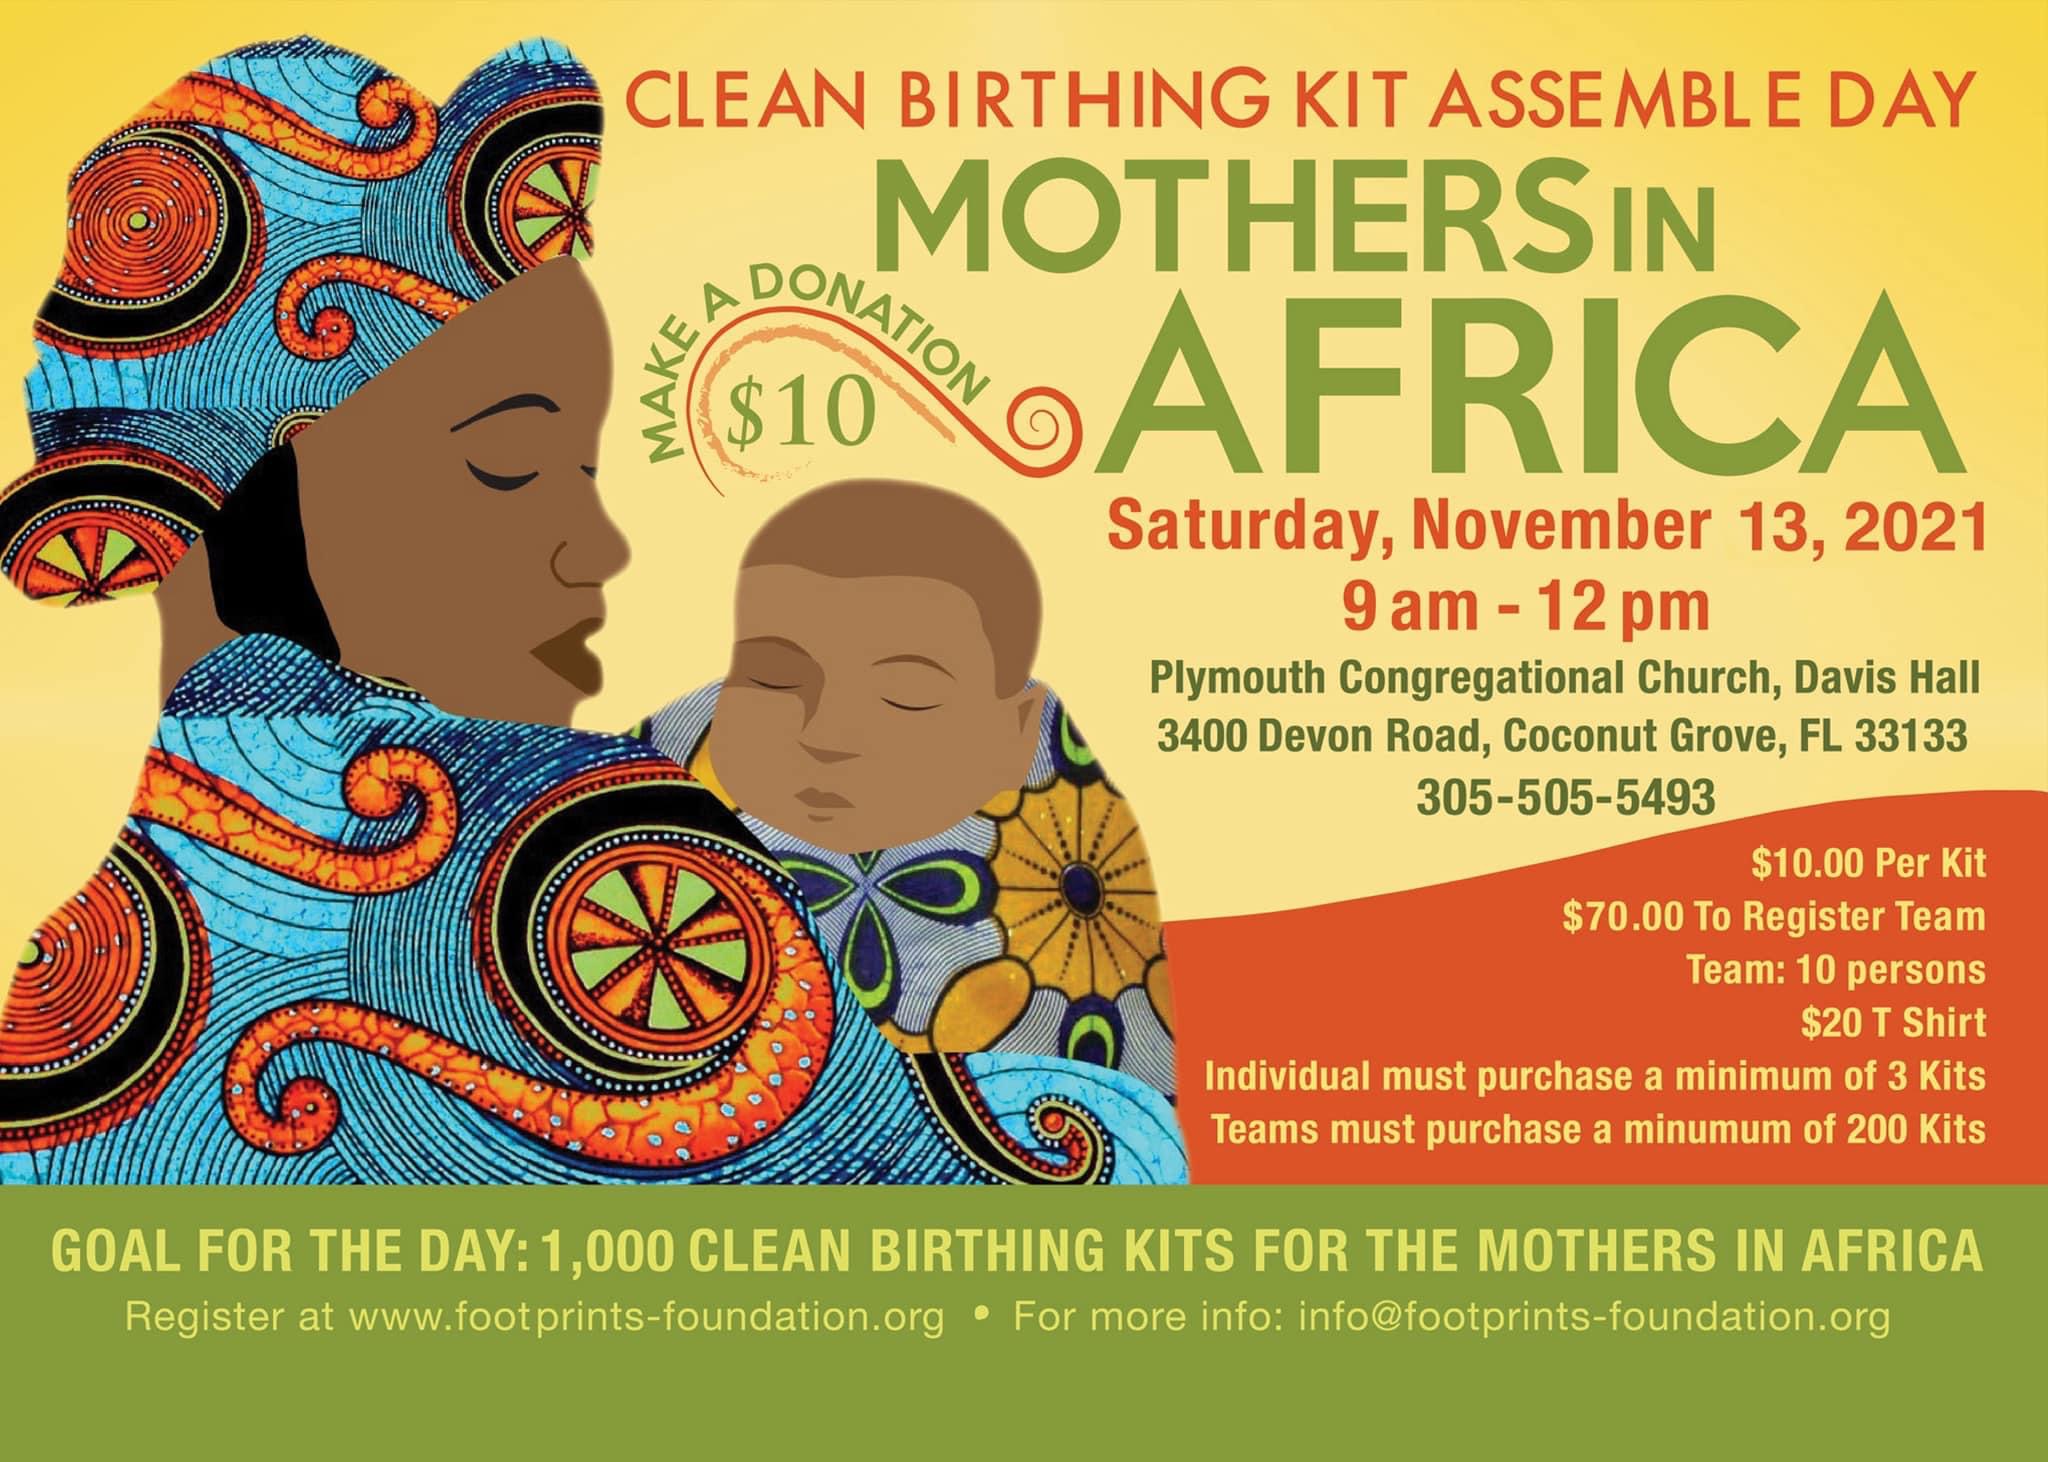 2021 Birthing Kit Assembly  Plymouth Congregational